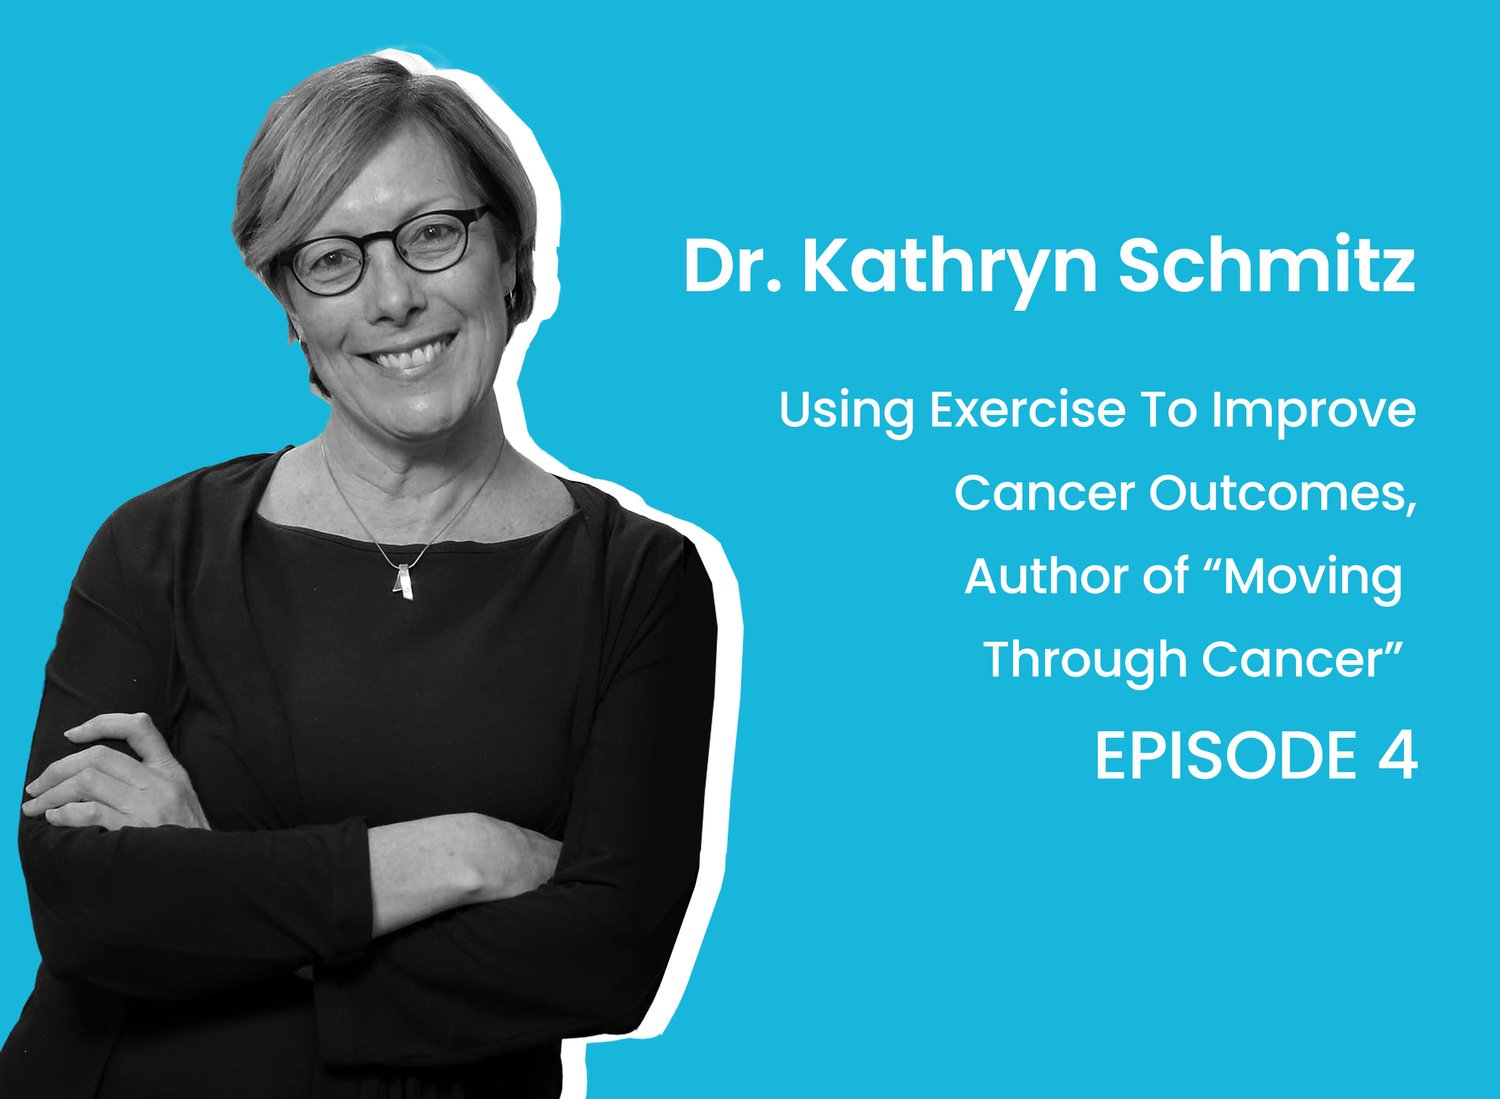 Dr. Kathryn Schmitz: Using Exercise to Improve Cancer Outcomes